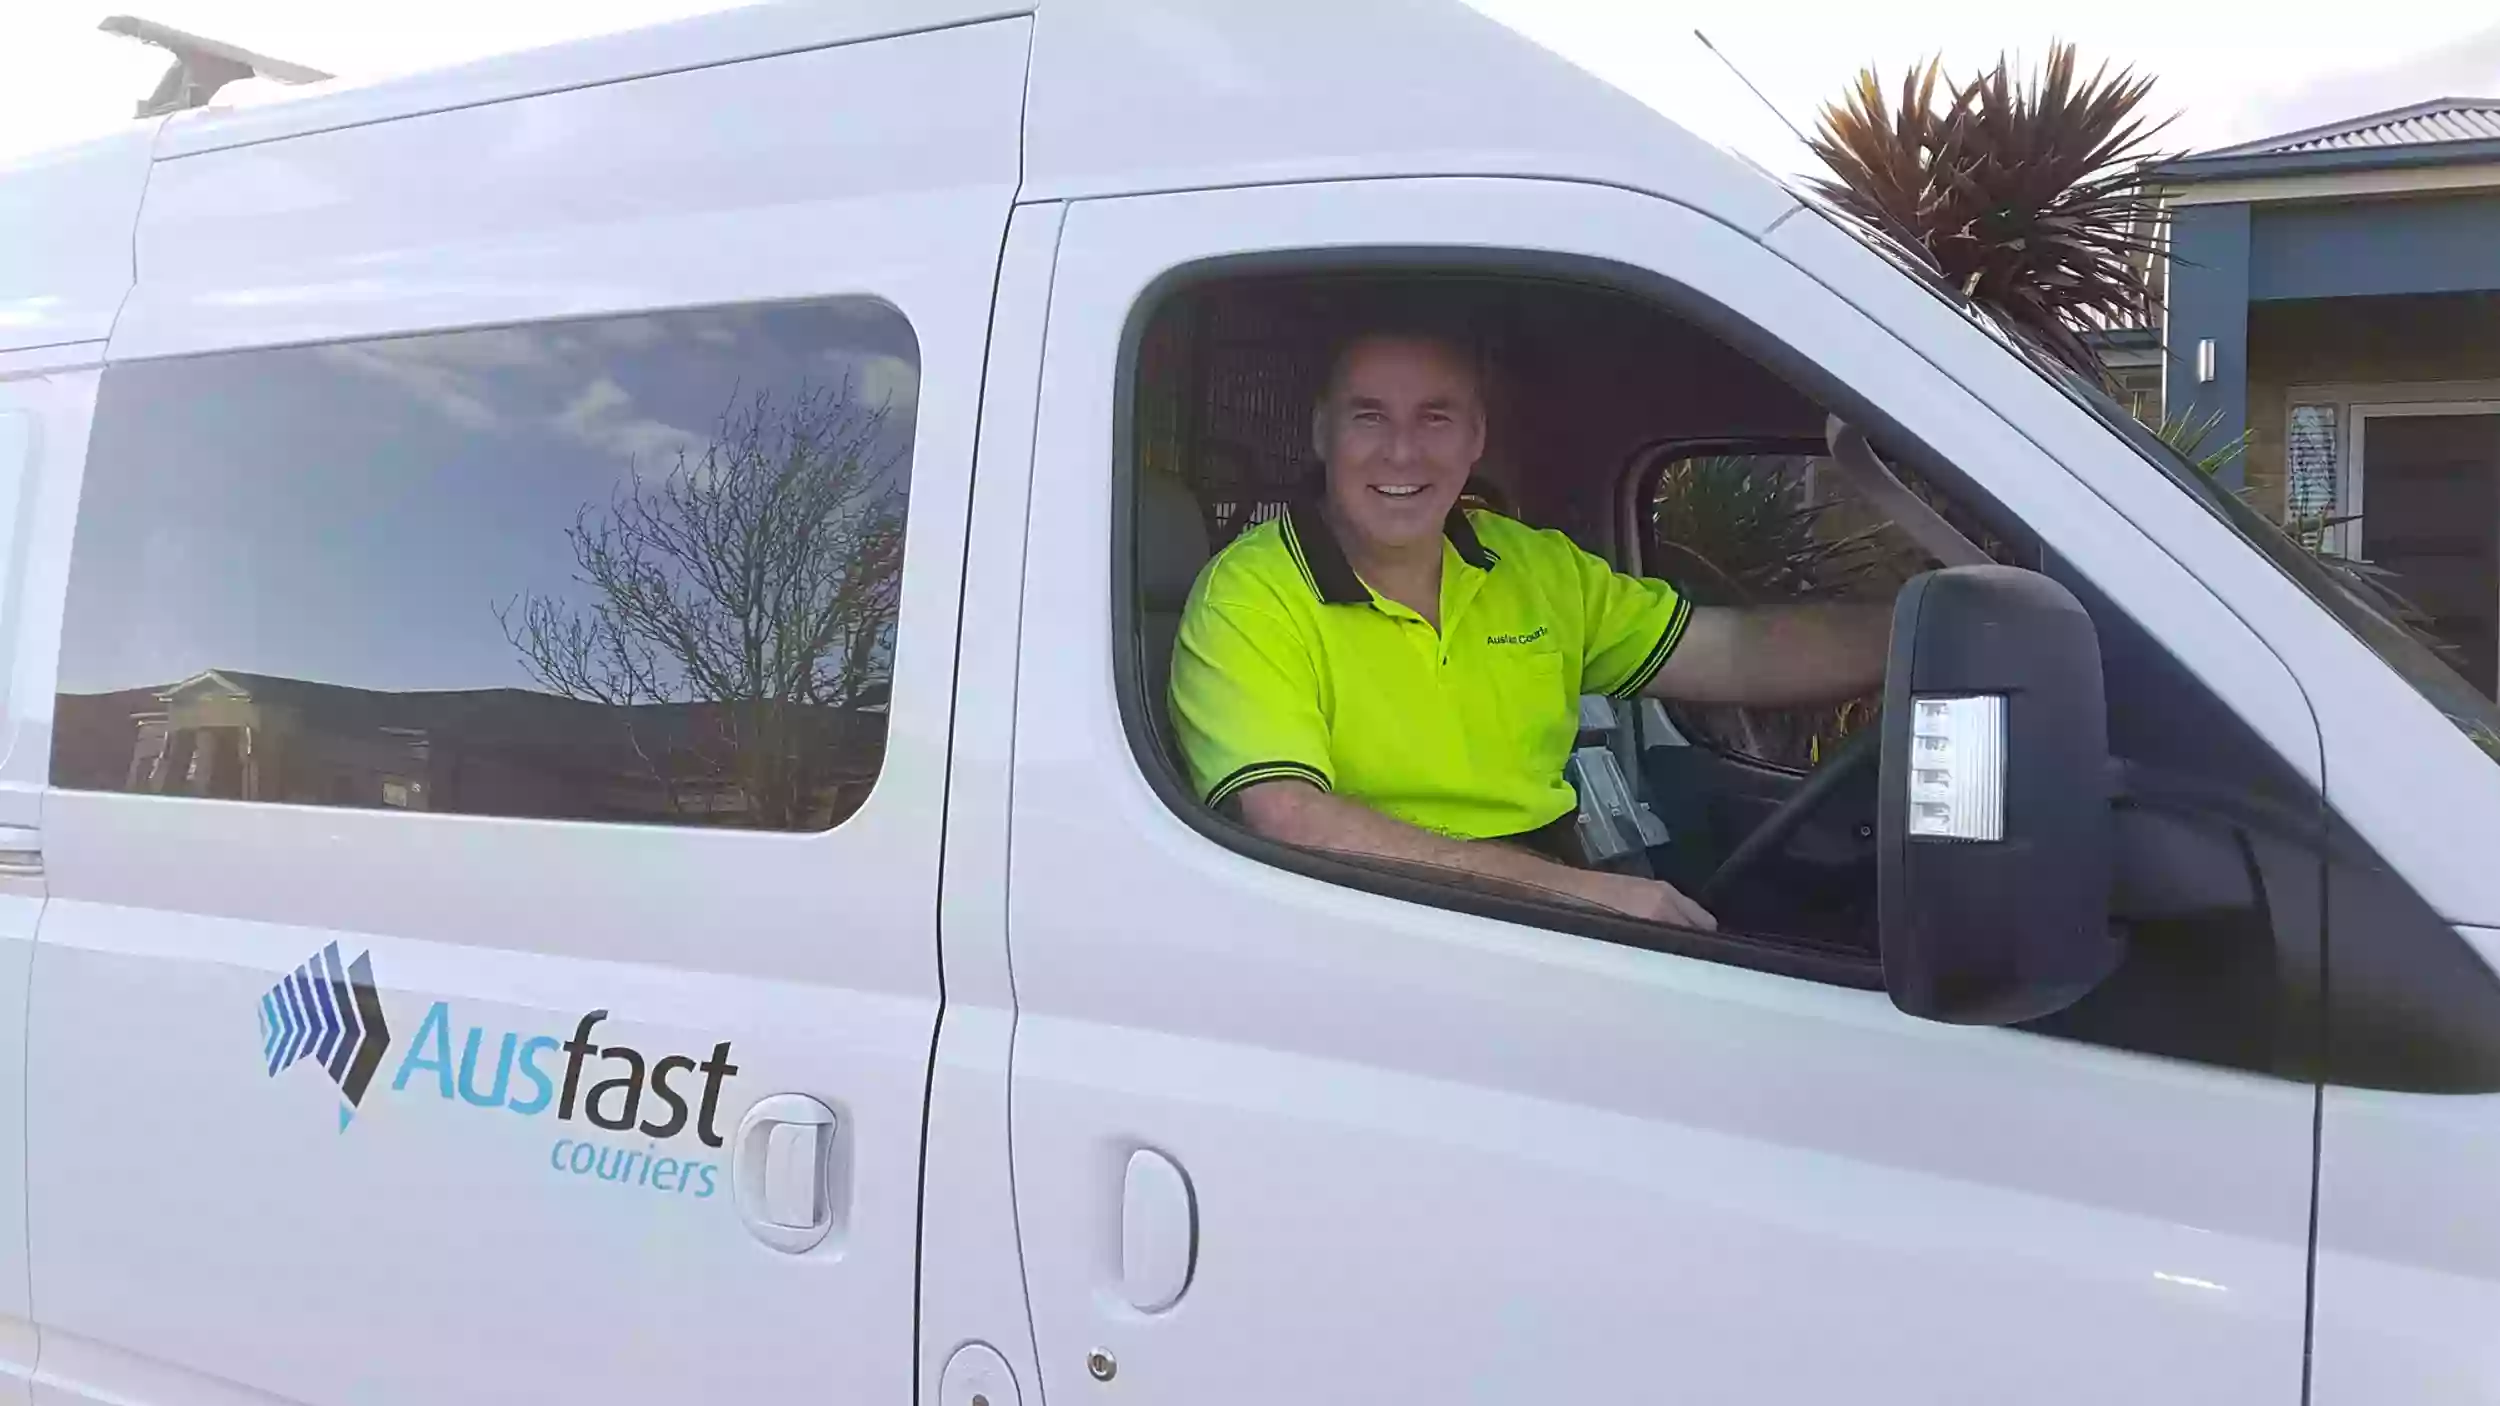 Ausfast Couriers